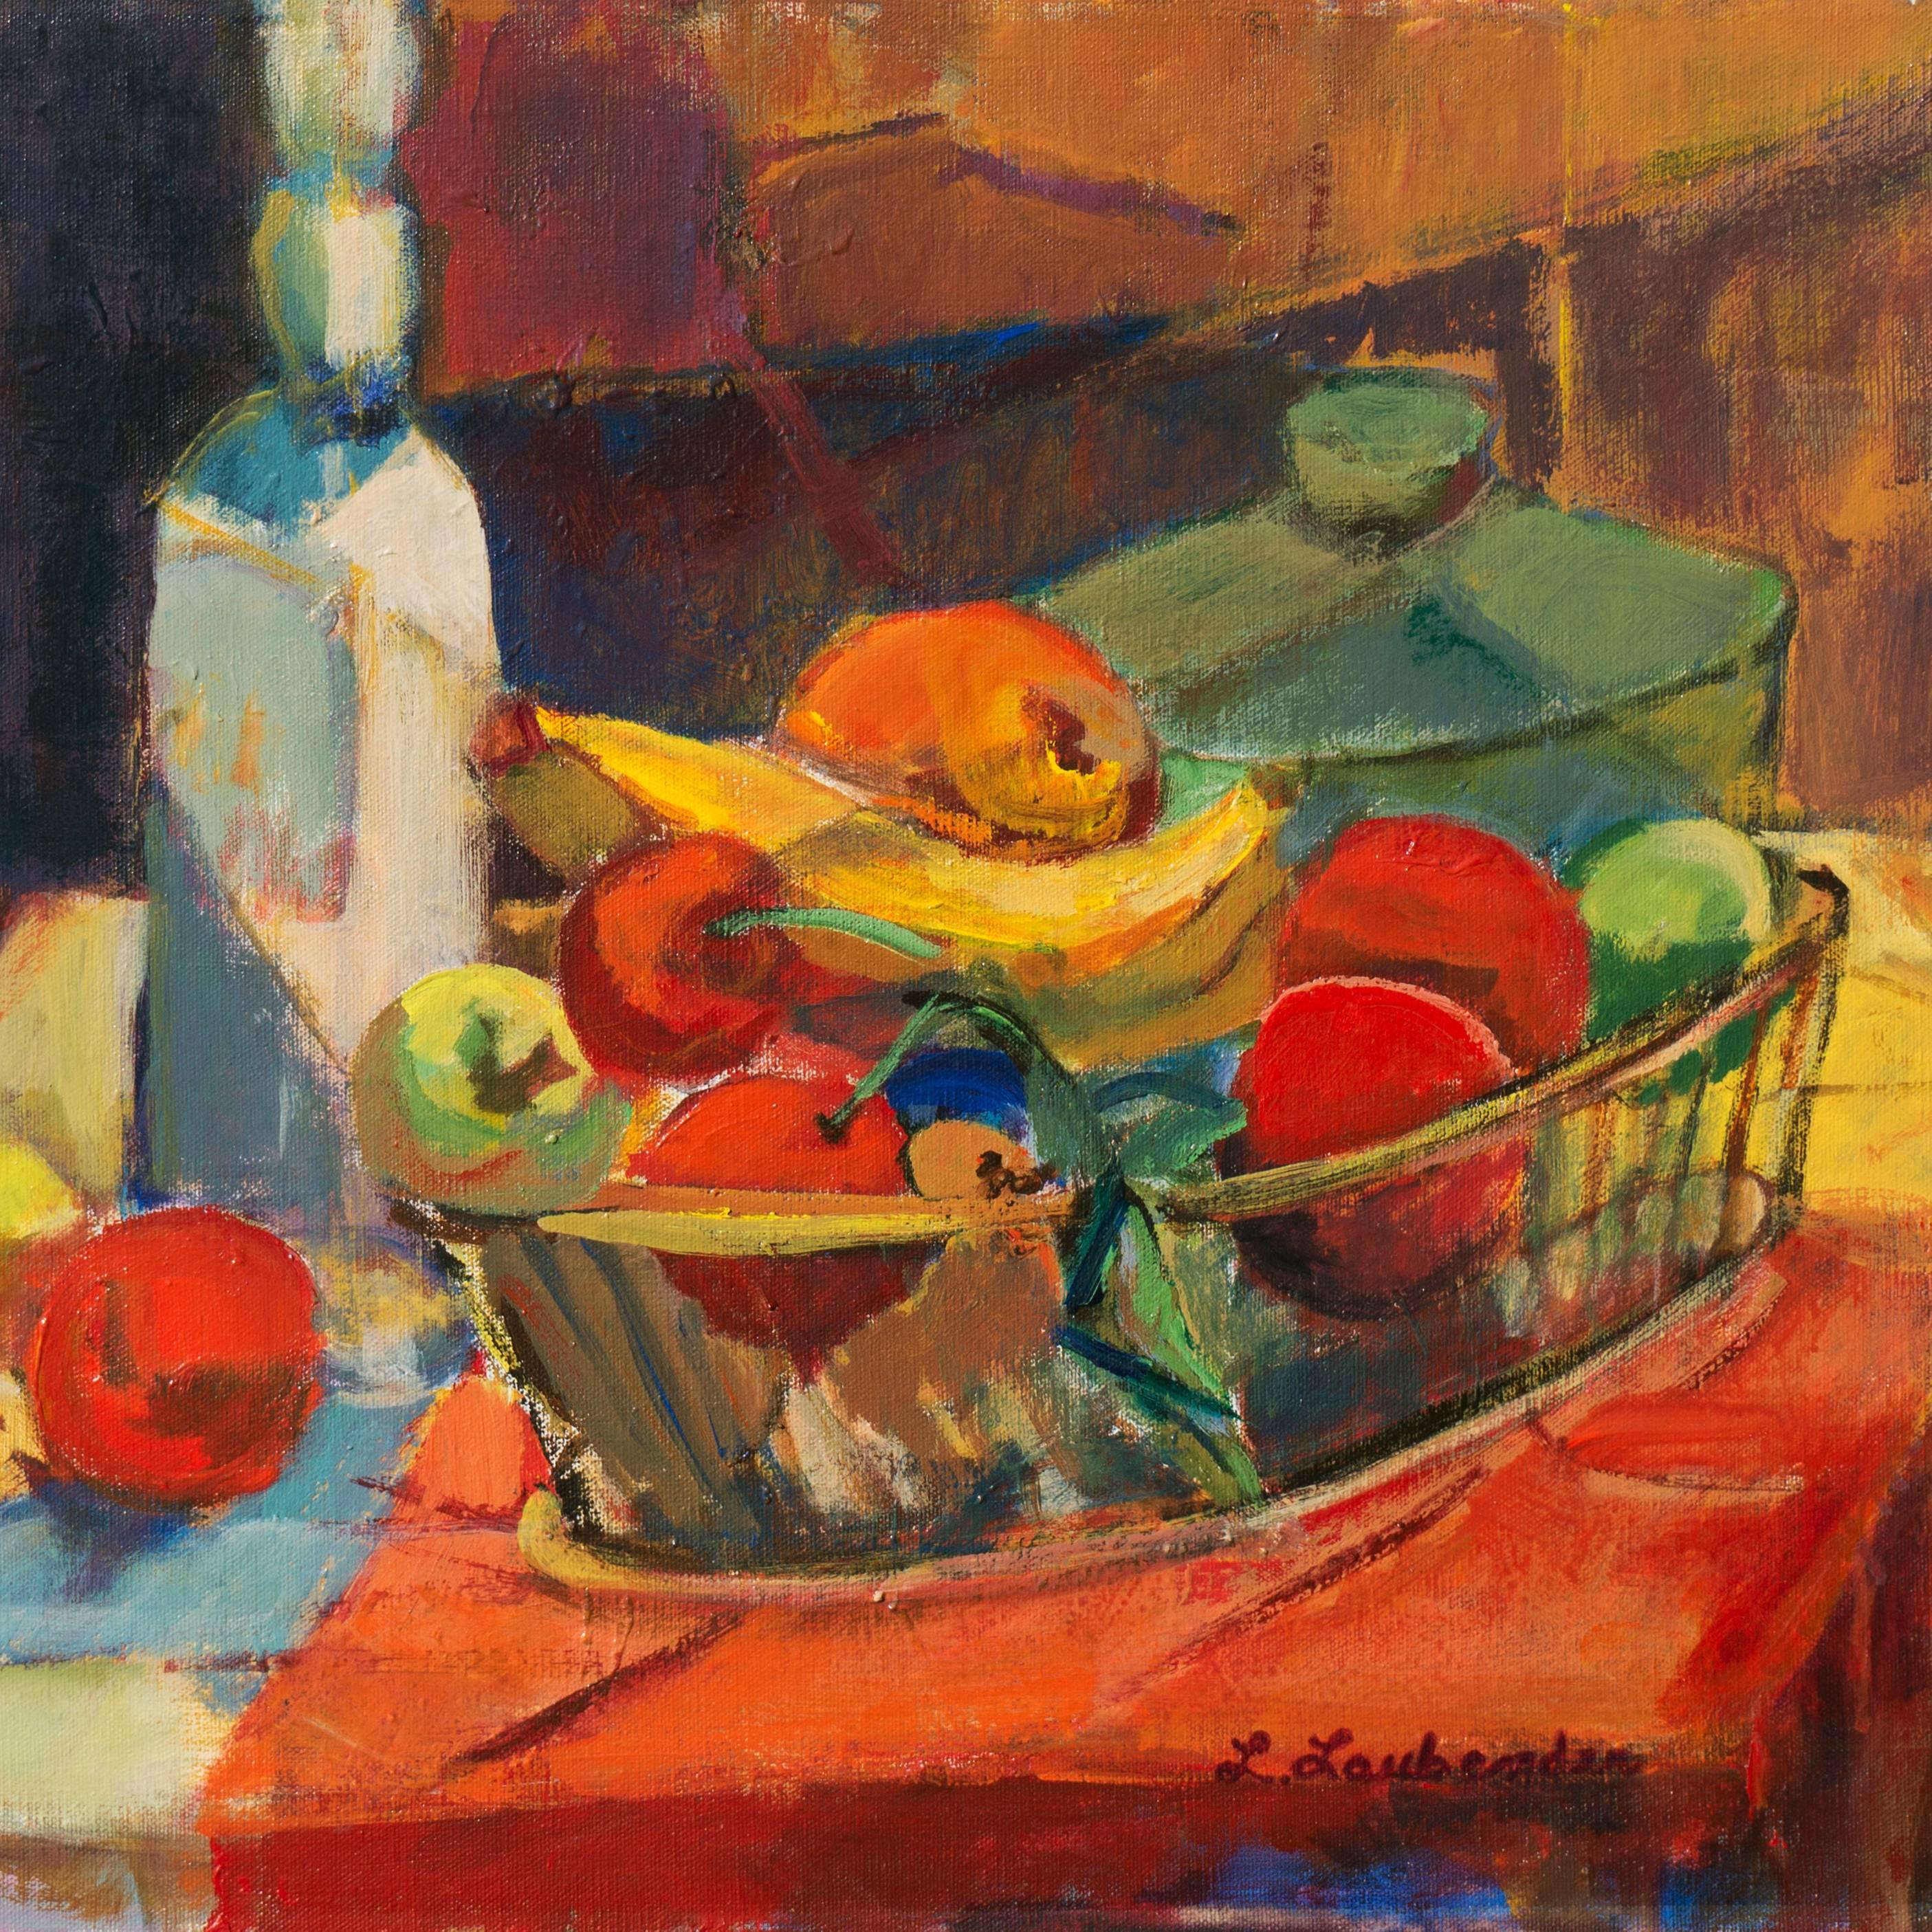 'Still Life With a Basket of Fruit', California Woman Artist - Painting by Lorraine Laubender